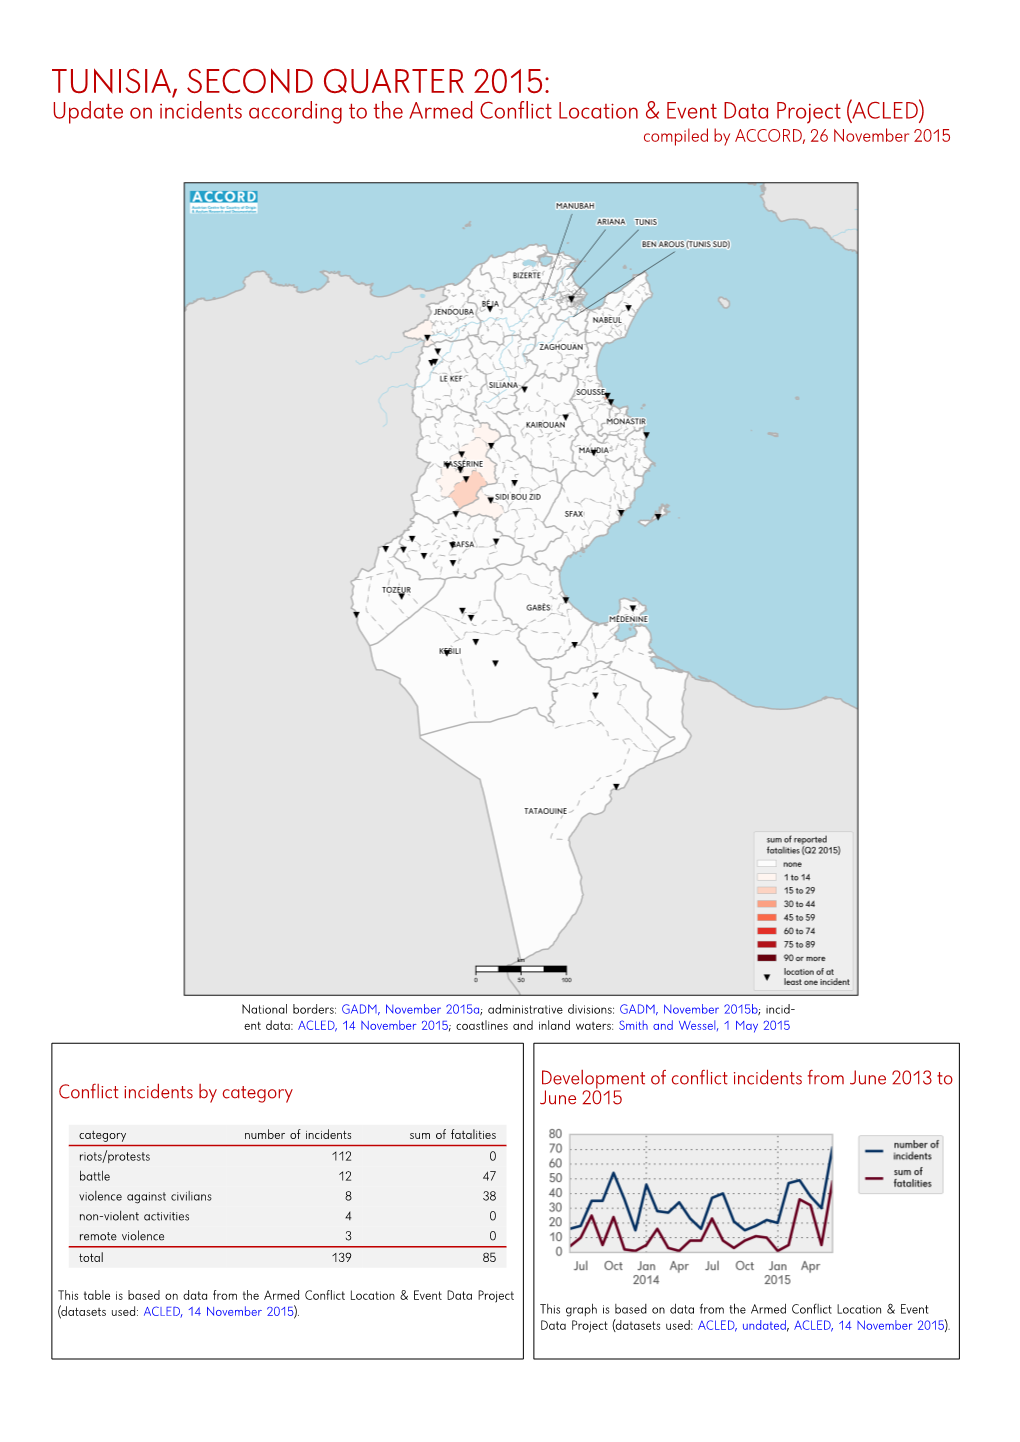 TUNISIA, SECOND QUARTER 2015: Update on Incidents According to the Armed Conflict Location & Event Data Project (ACLED) Compiled by ACCORD, 26 November 2015